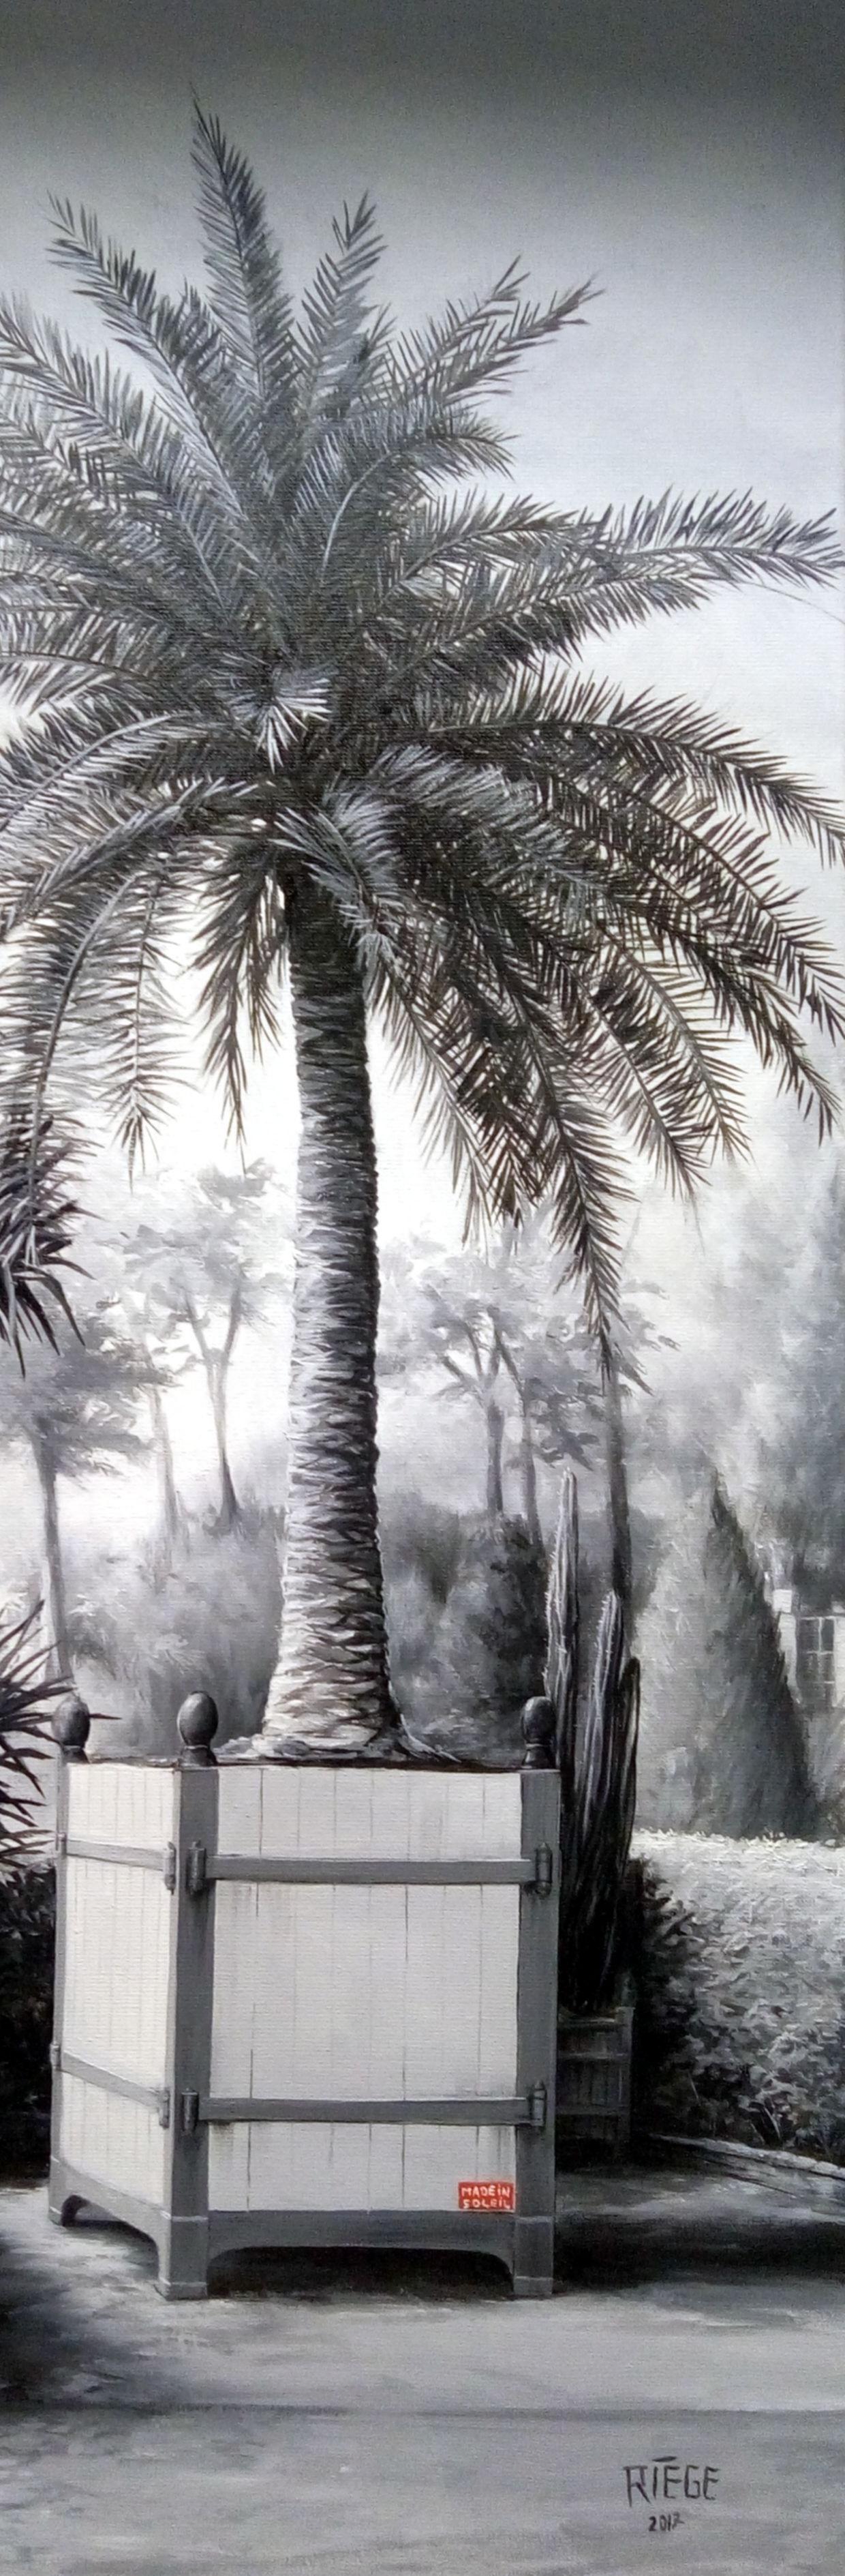 Dream of a palm tree - Painting by Richard Gosselin-Riege